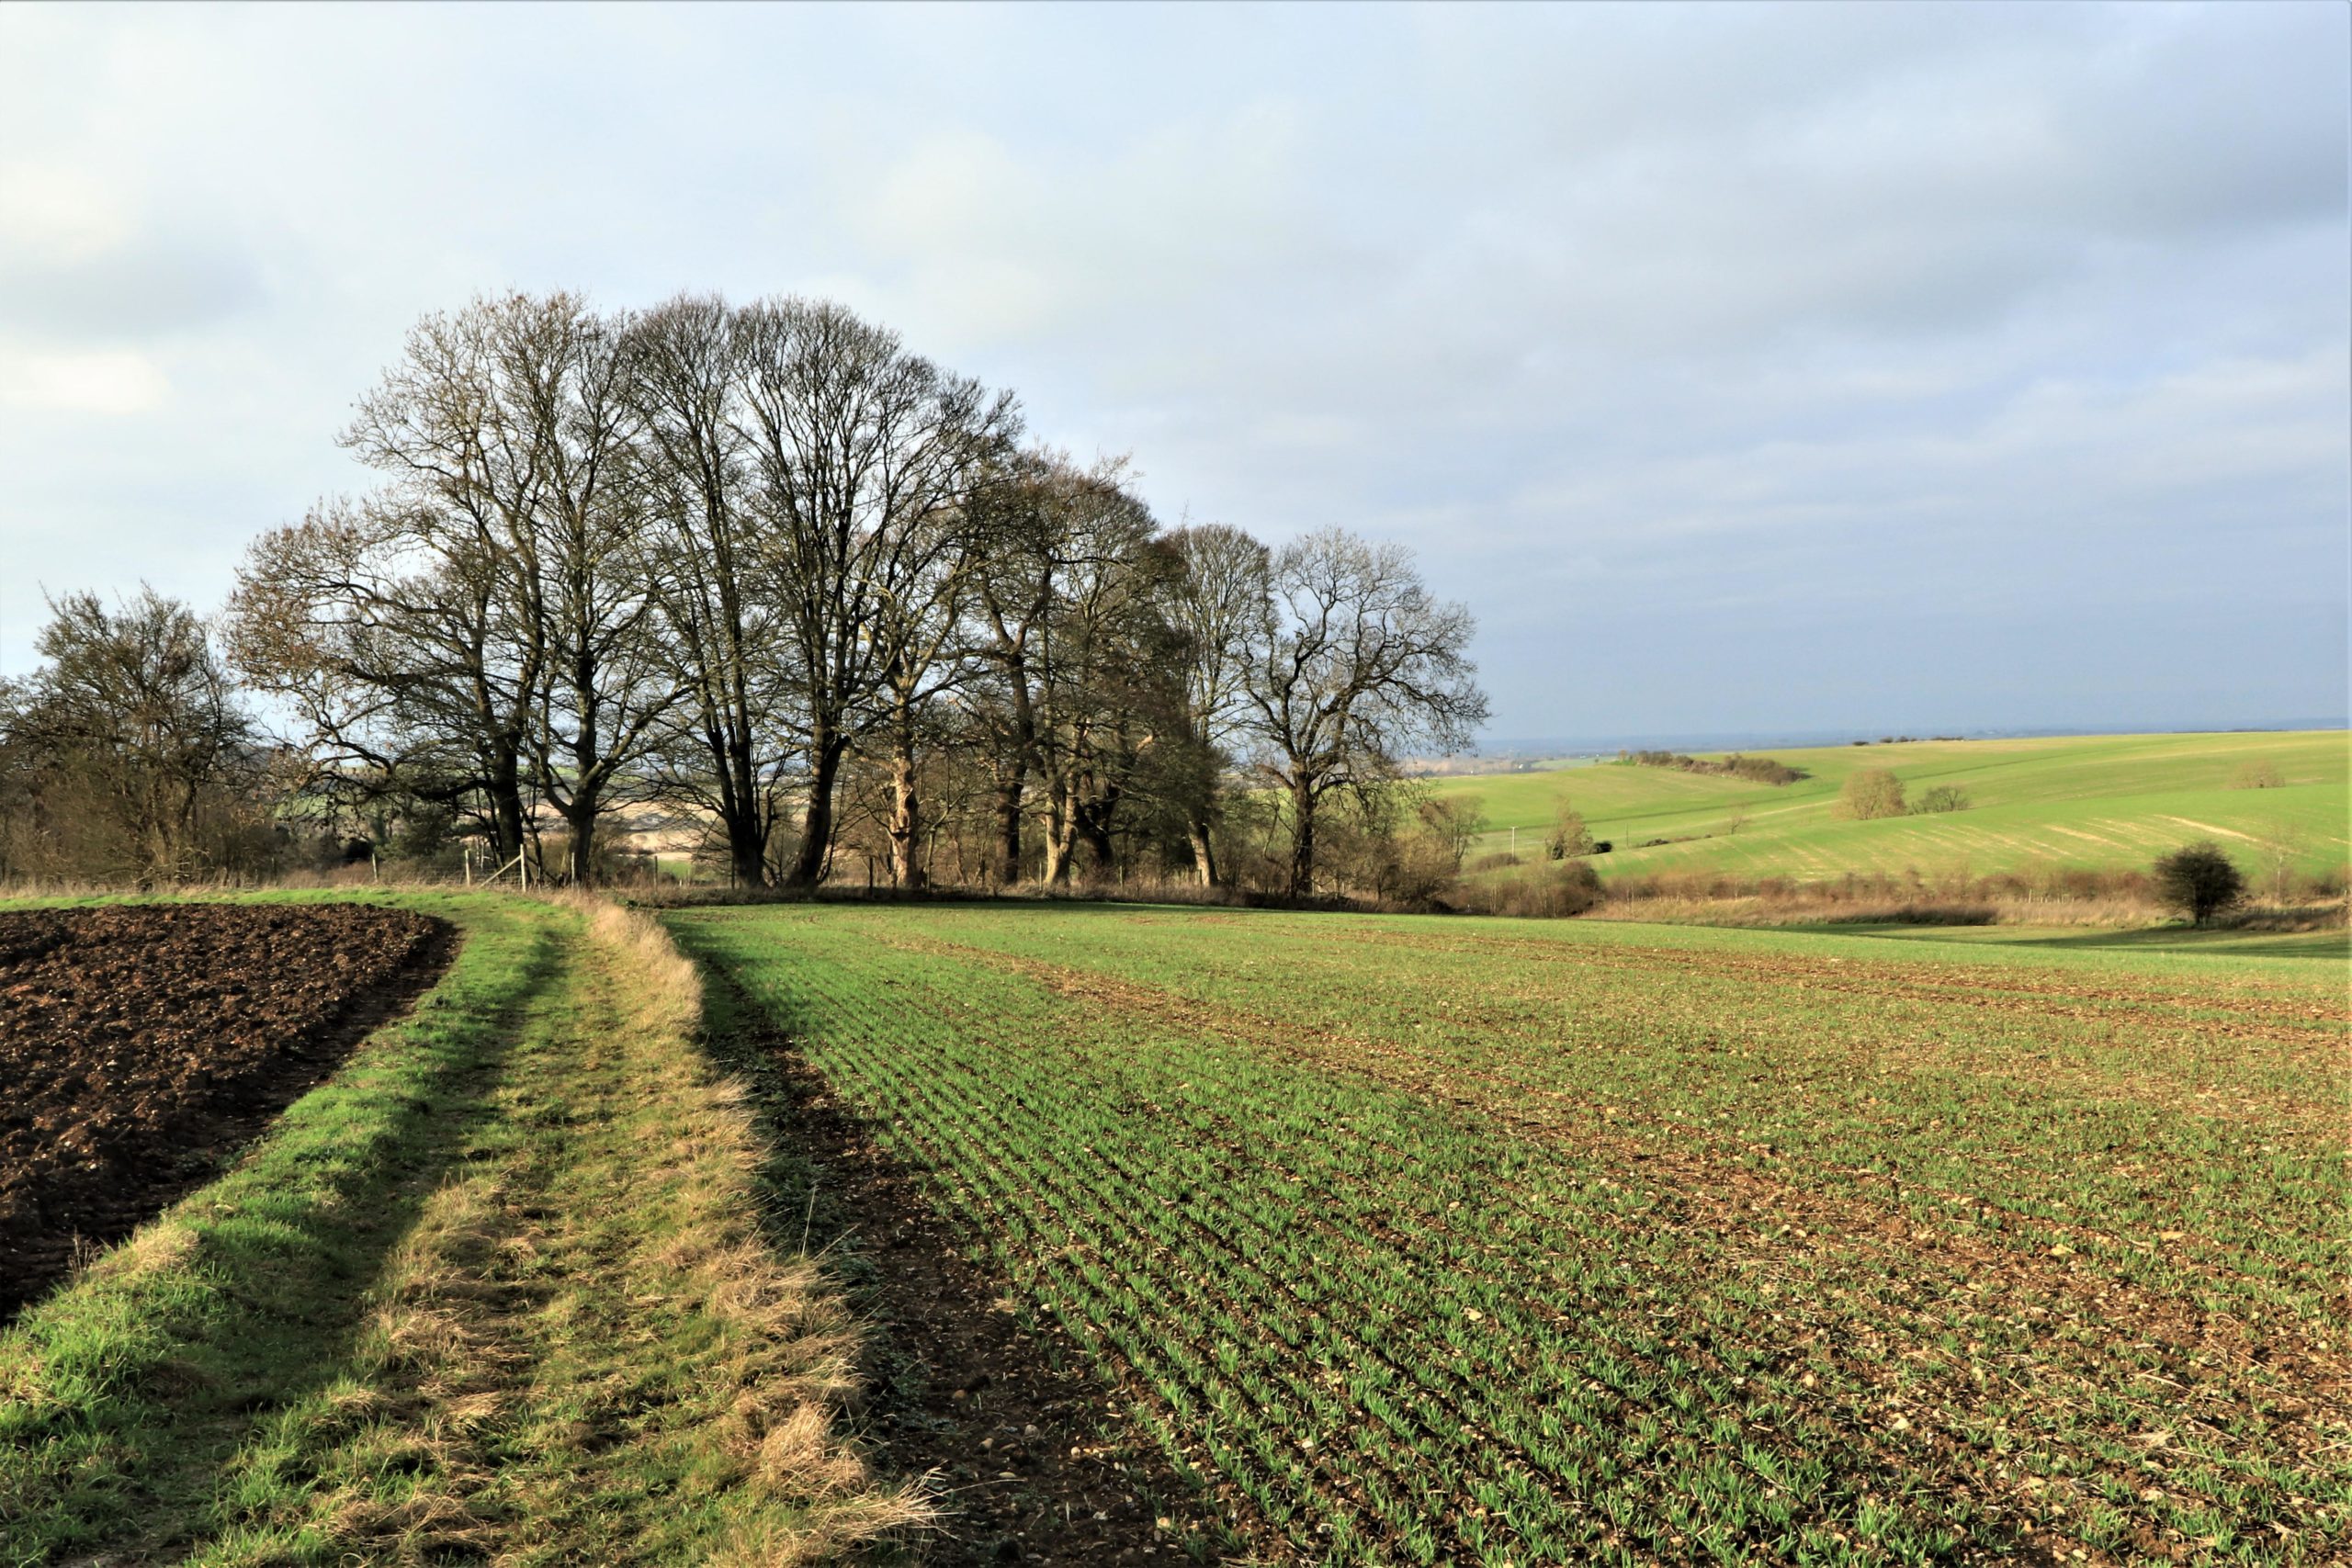 an attractive winter landscape with green arable fields and bare branched trees silhouetted against a gray sky